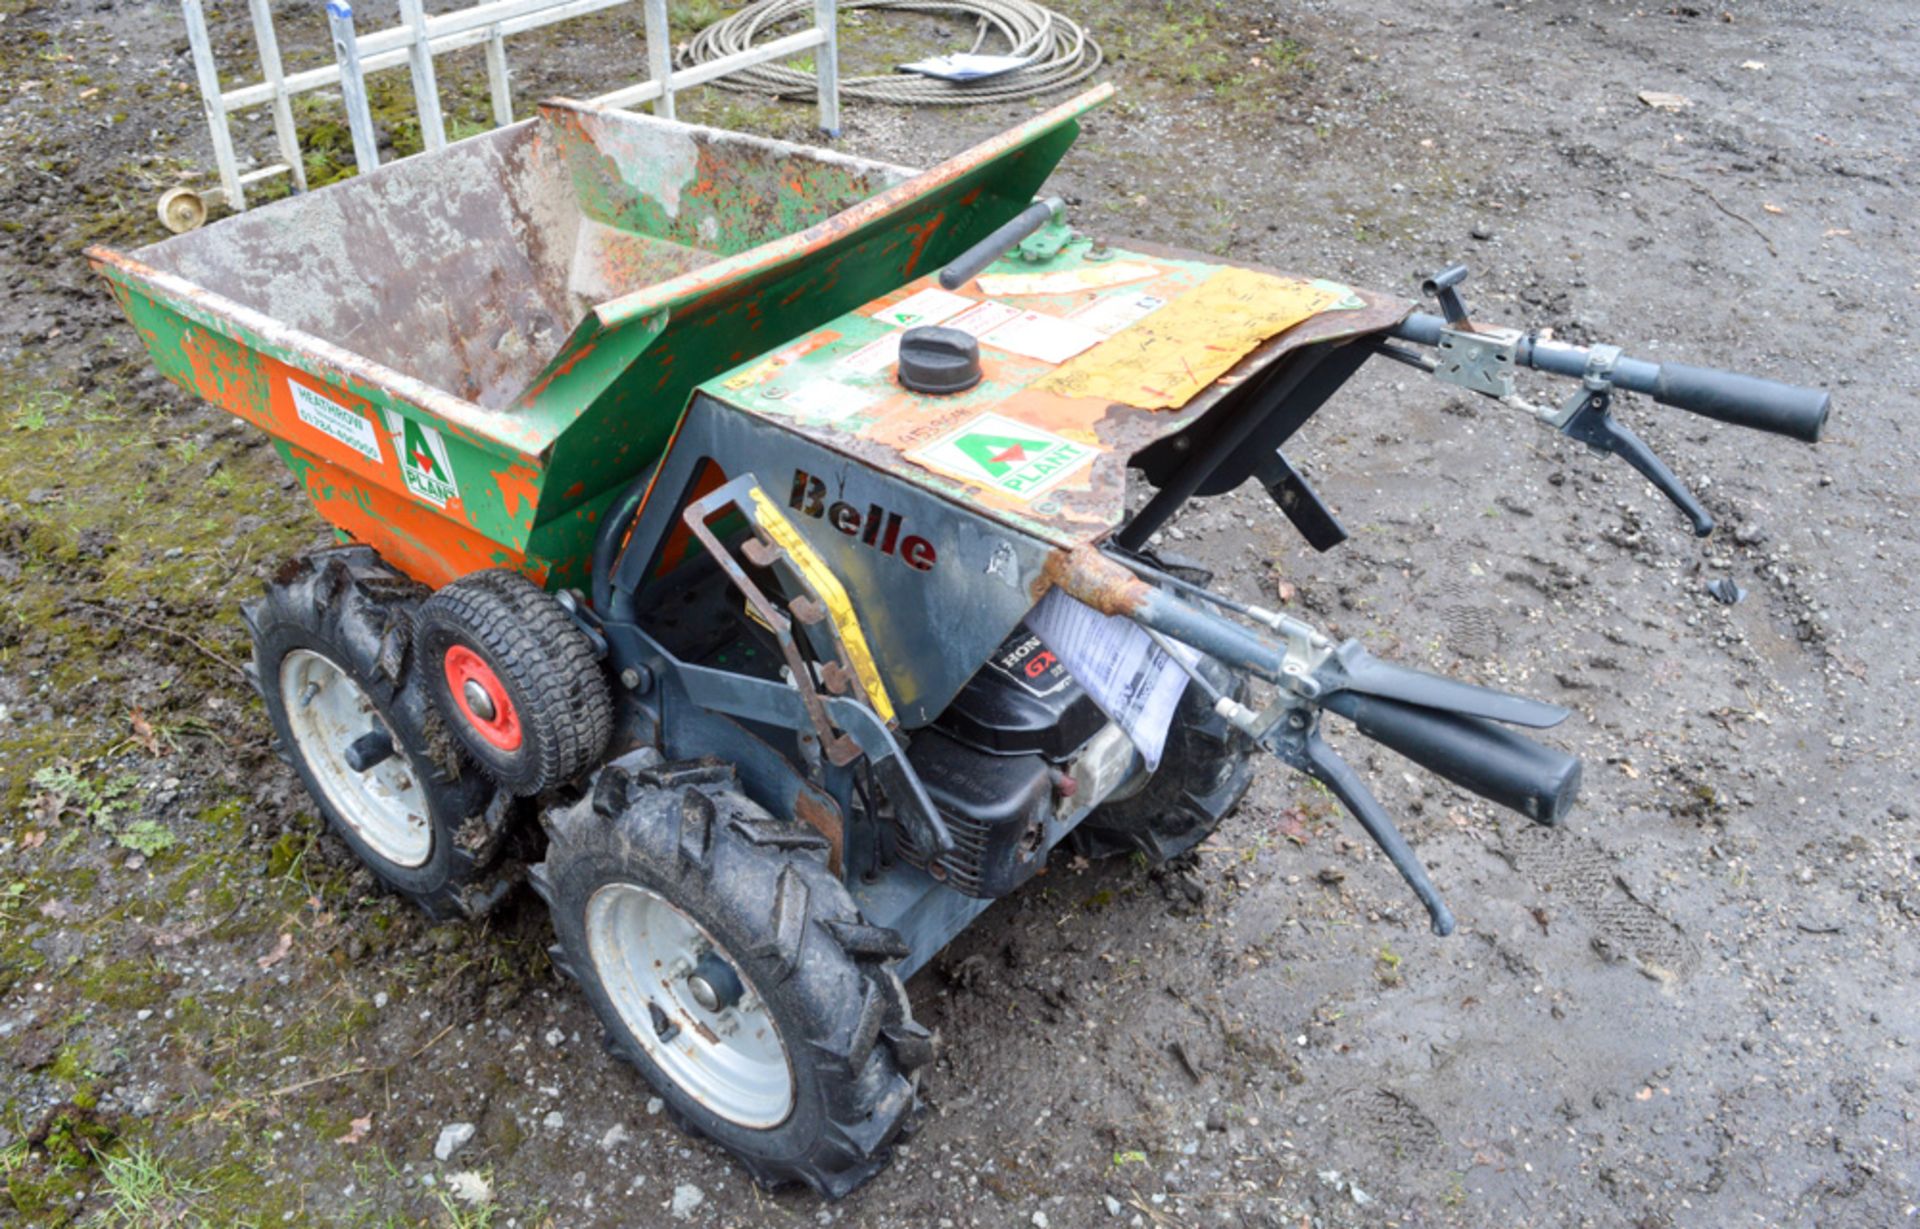 Belle BMD01 petrol driven power barrow Year: 2010 S/N: 143804 A539641 - Image 3 of 5